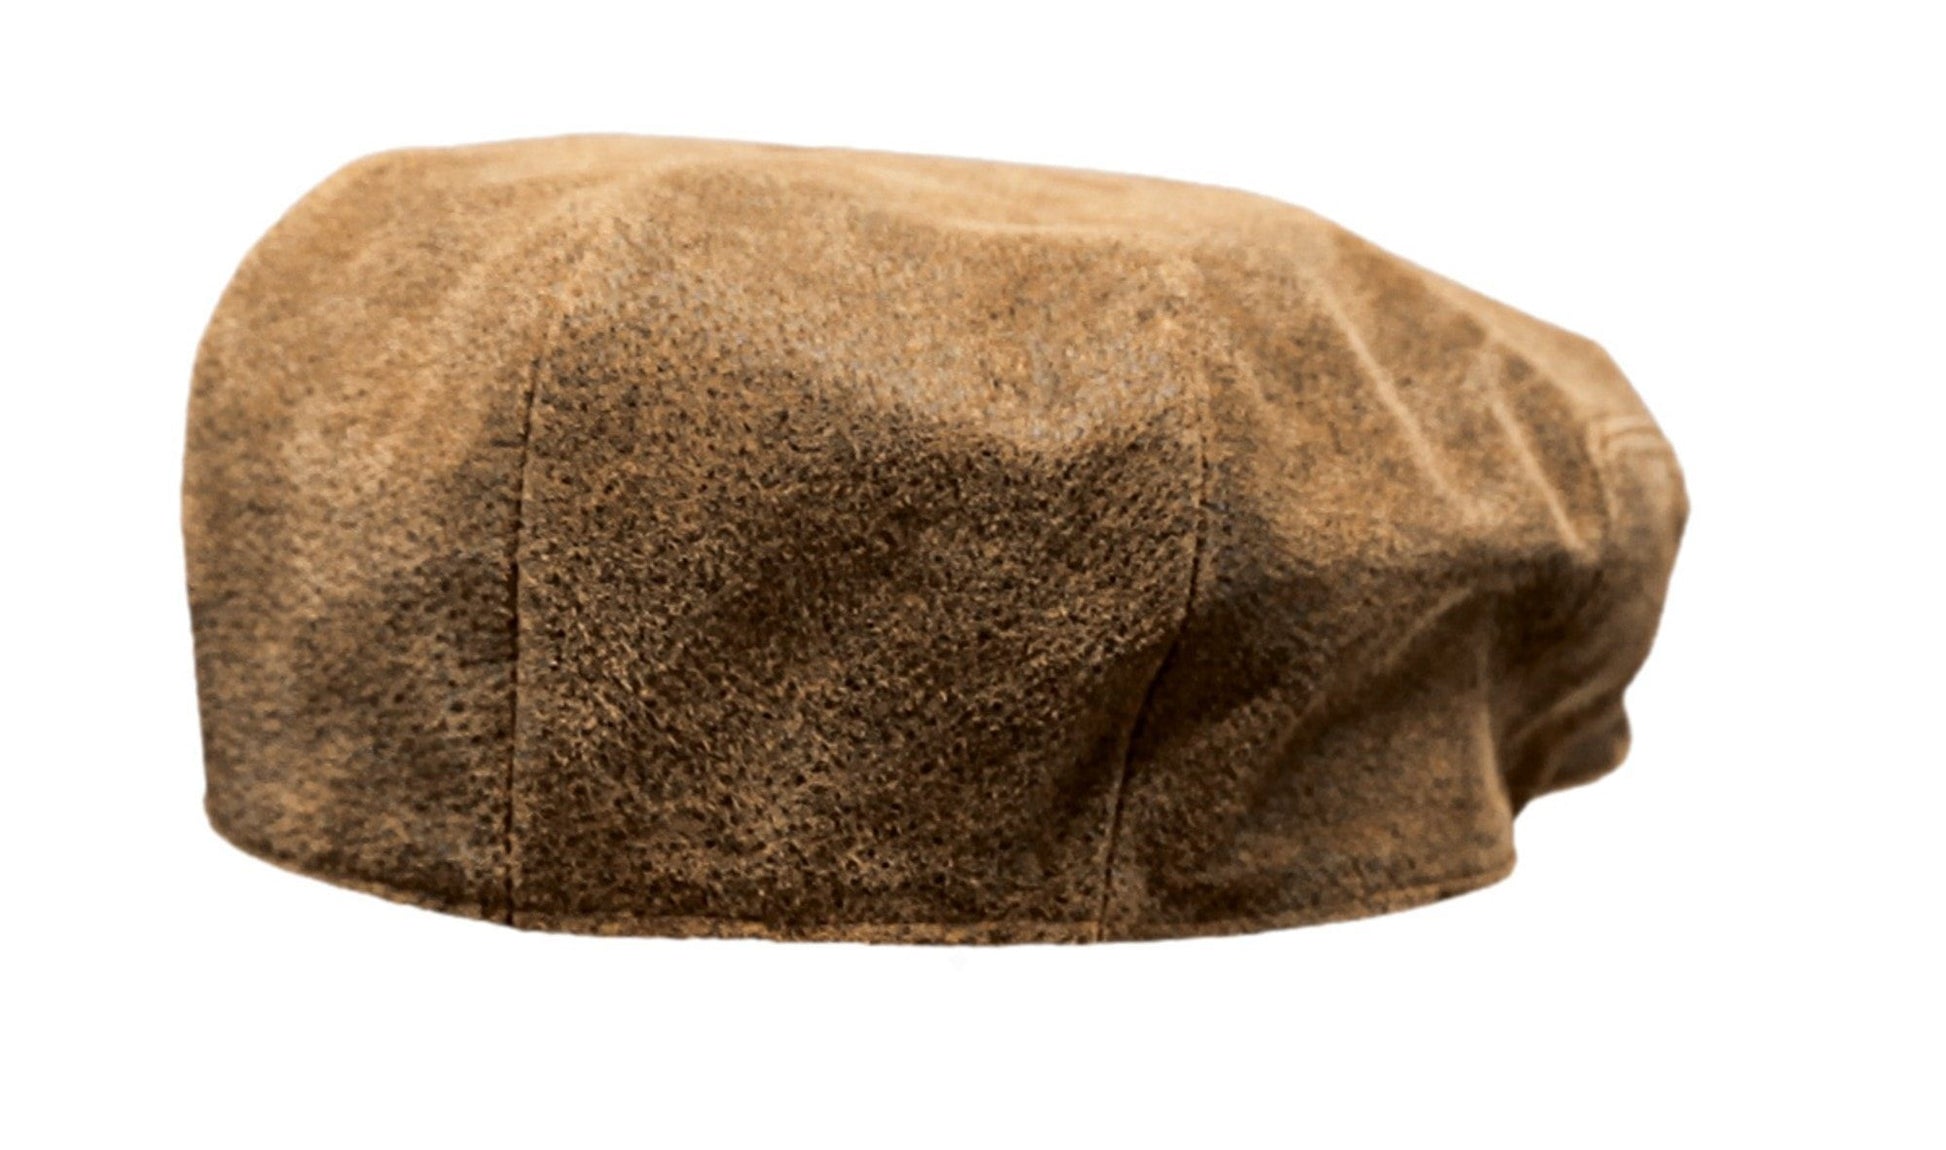 Outback Trading Co Ascot Cap - Brown